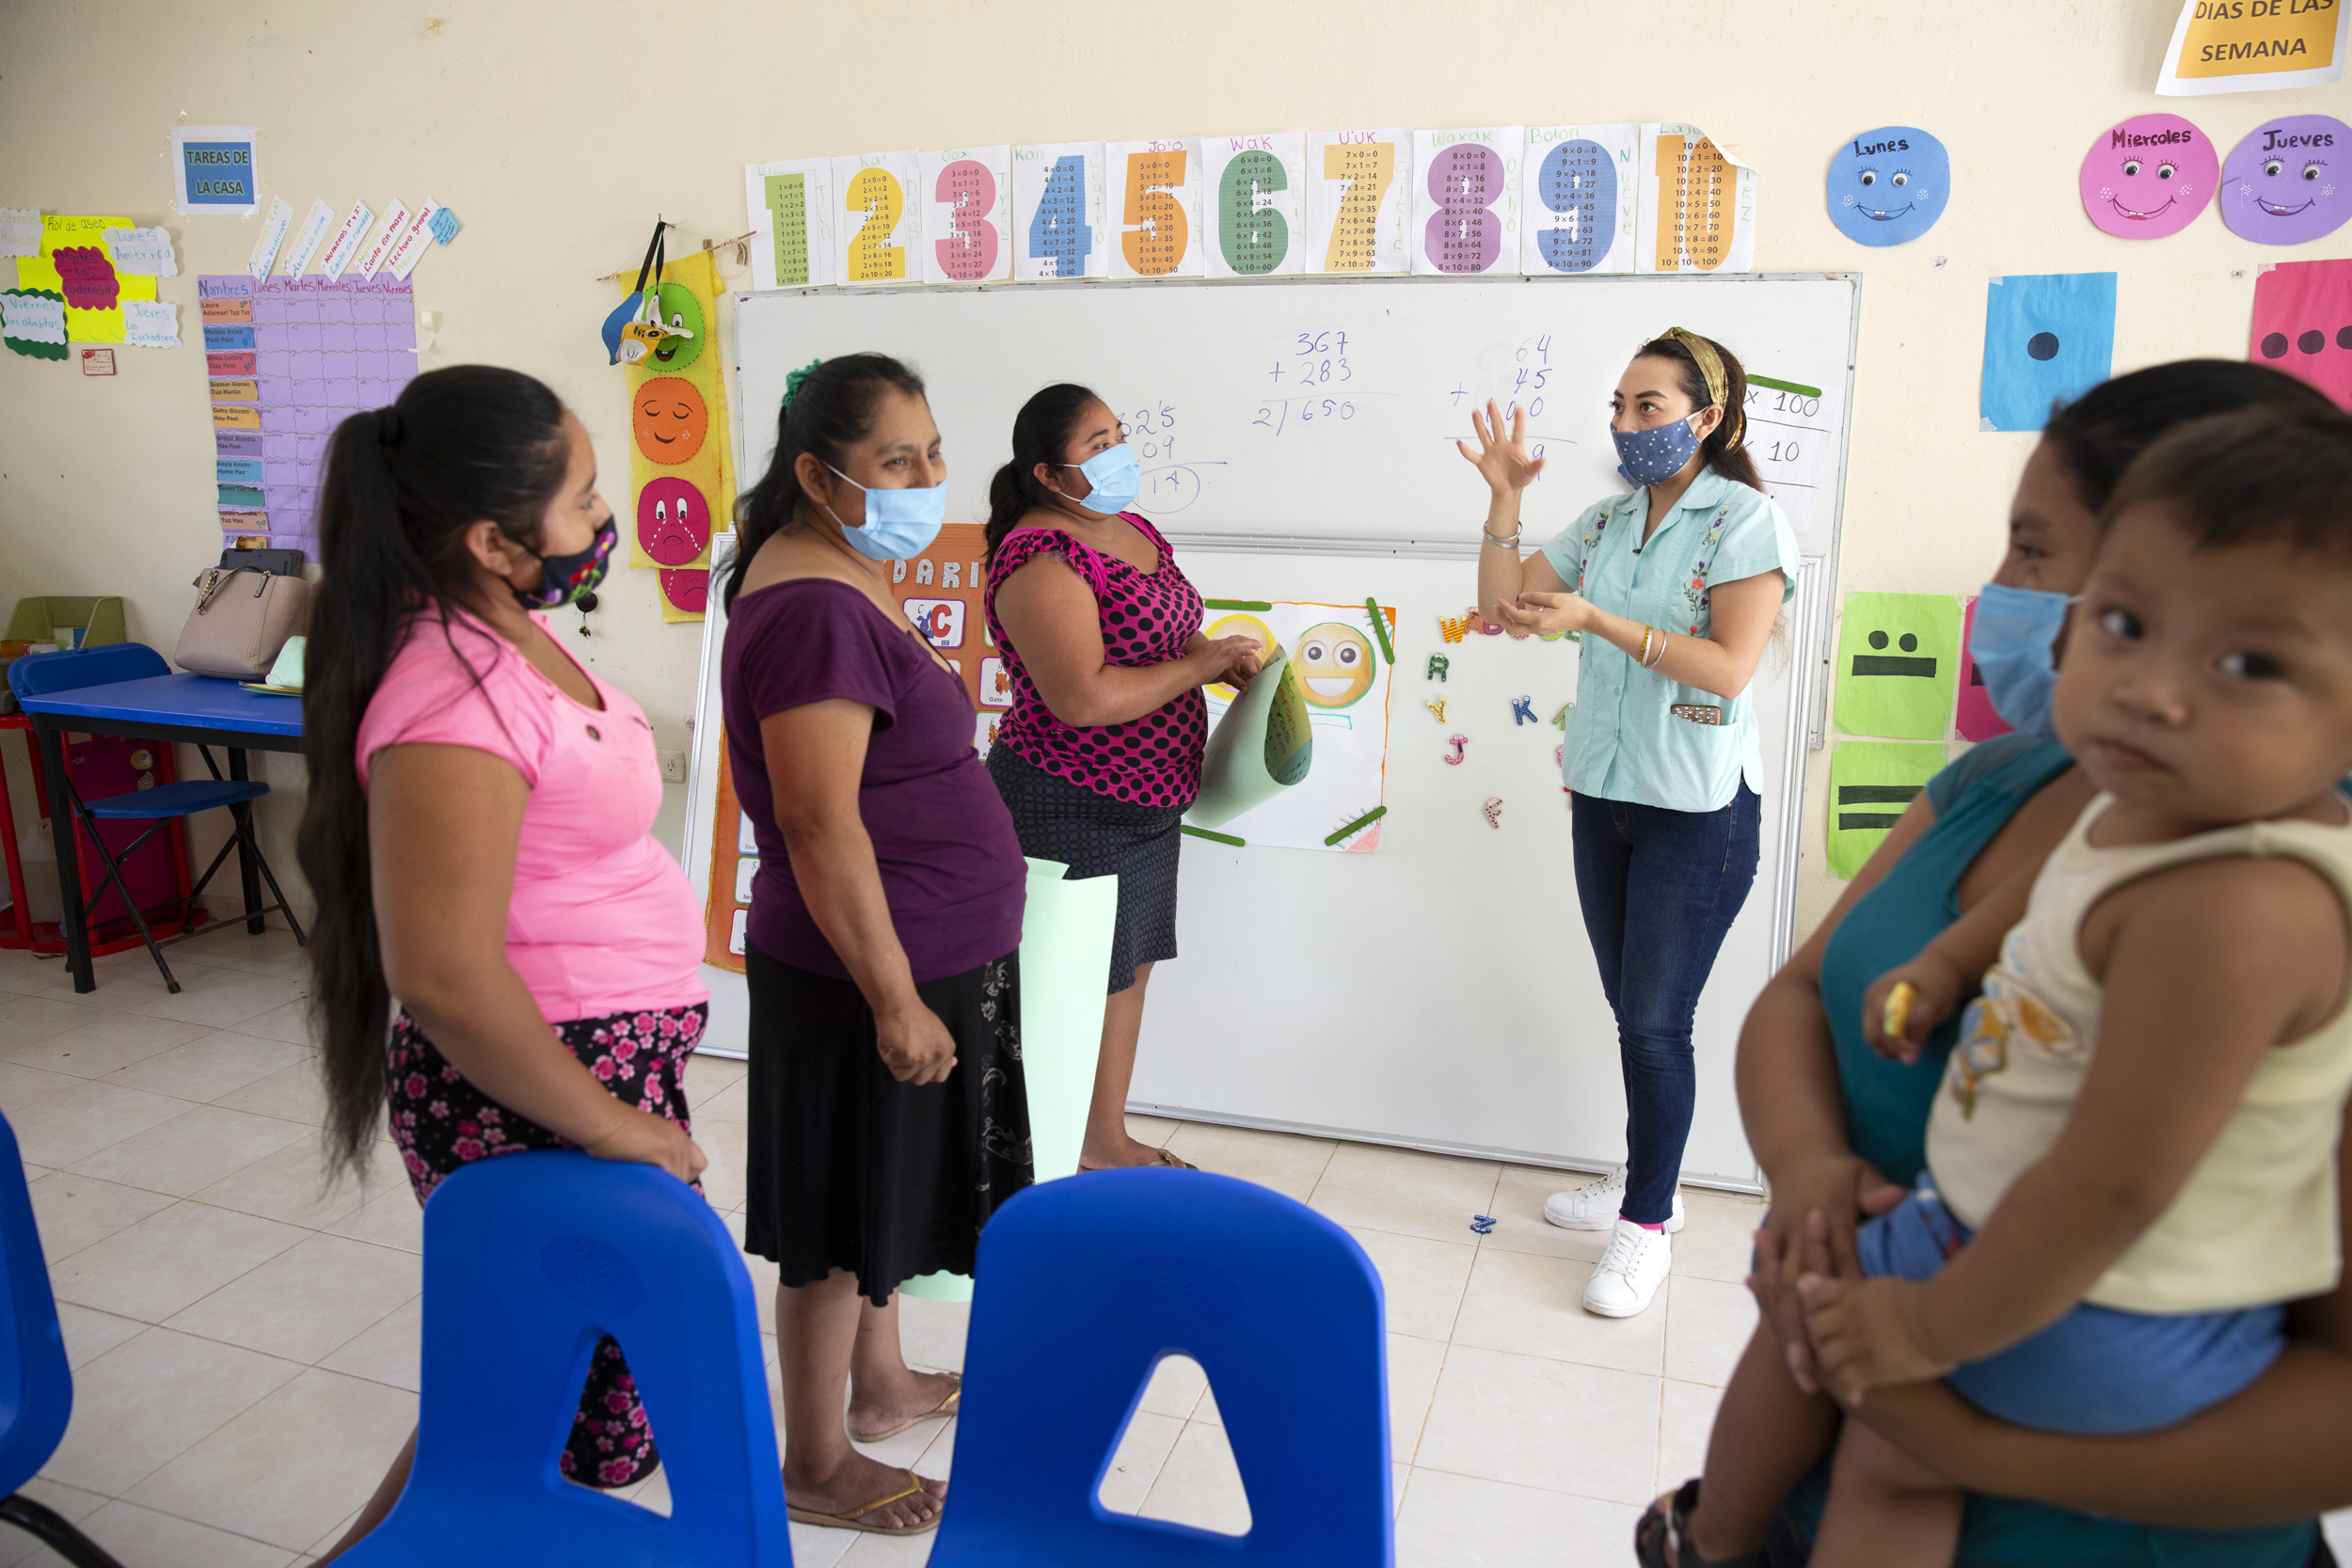 Mary Carmen Che Chi, 31, meets with the mothers of her pupils, amid the coronavirus pandemic at the Ignacio Ramírez Calzada primary school in the indigenous community of Celtún, Chichimilá municipality, Yucatán state, Mexico on May 4, 2021. Mary Carmen meets with the parents every two weeks to distribute learning materials, as well as to support and coach them through at-home learning during school closure. The Covid-19 pandemic has disrupted education for an estimated 90 percent of the worlds school children. In Mexico, schools have been closed since mid-March 2020 and the government switched the system to distanced learning or Aprende en Casa (Learn at Home), where students learn on television and the internet at home. However, due to the lack of internet connectivity and the barrier of the language, distance learning has been impossible for many children in isolated and impoverished parts of the country. Celtún is a rural, remote and indigenous community in the state of Yucatán, with no telecommunications infrastructure. There, to ensure continuity of learning to their students, teachers at the Ignacio Ramírez Calzada primary school Mary Carmen Che Chi and José Manuel Cen Kauil, prepare bilingual learning materials at their home and distribute it to their students every two weeks. Today, schools still remain closed in Mexico, but since September 2020, the two teachers have gotten the green light from their supervisor to run small in-person classes every two weeks at the school as the coronavirus pandemic continues. (Photo by Bénédicte Desrus/Sipa USA)No Use Germany.